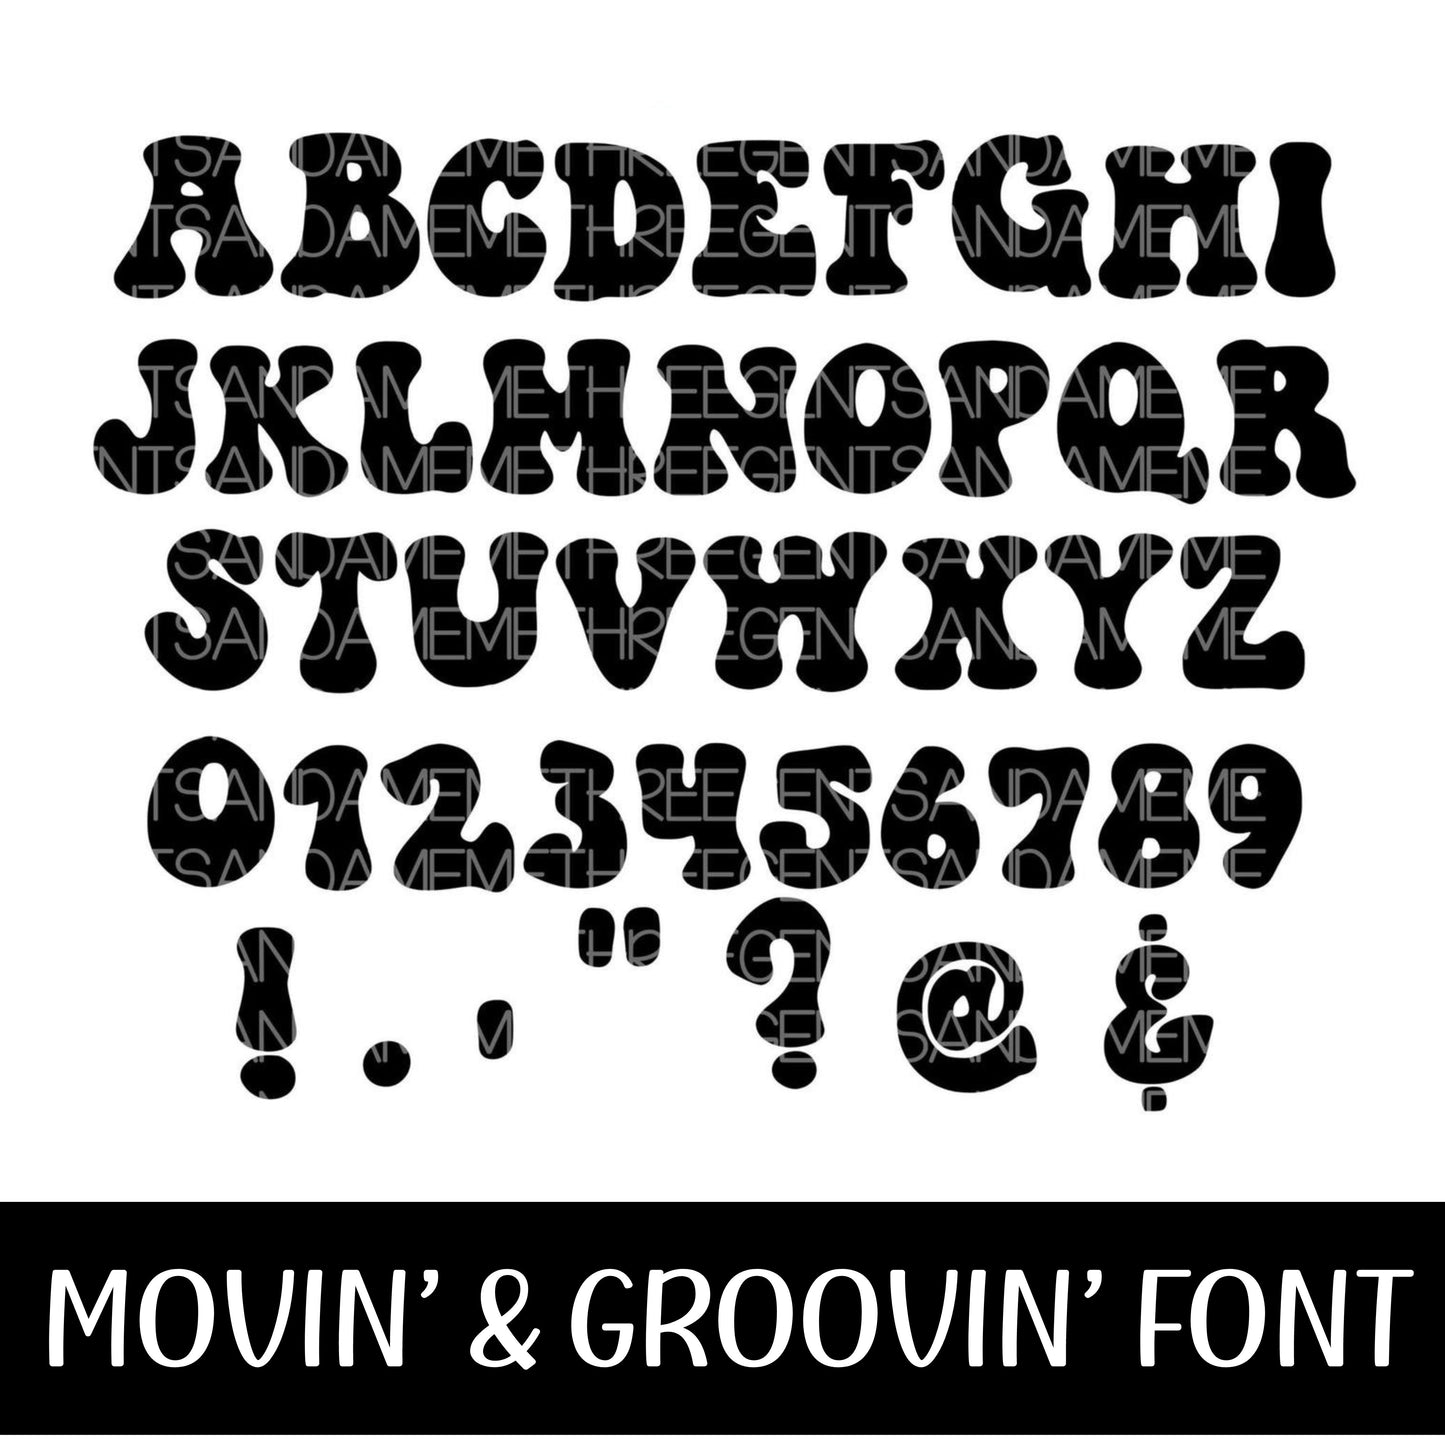 MOVIN’ AND GROOVIN’ FONT